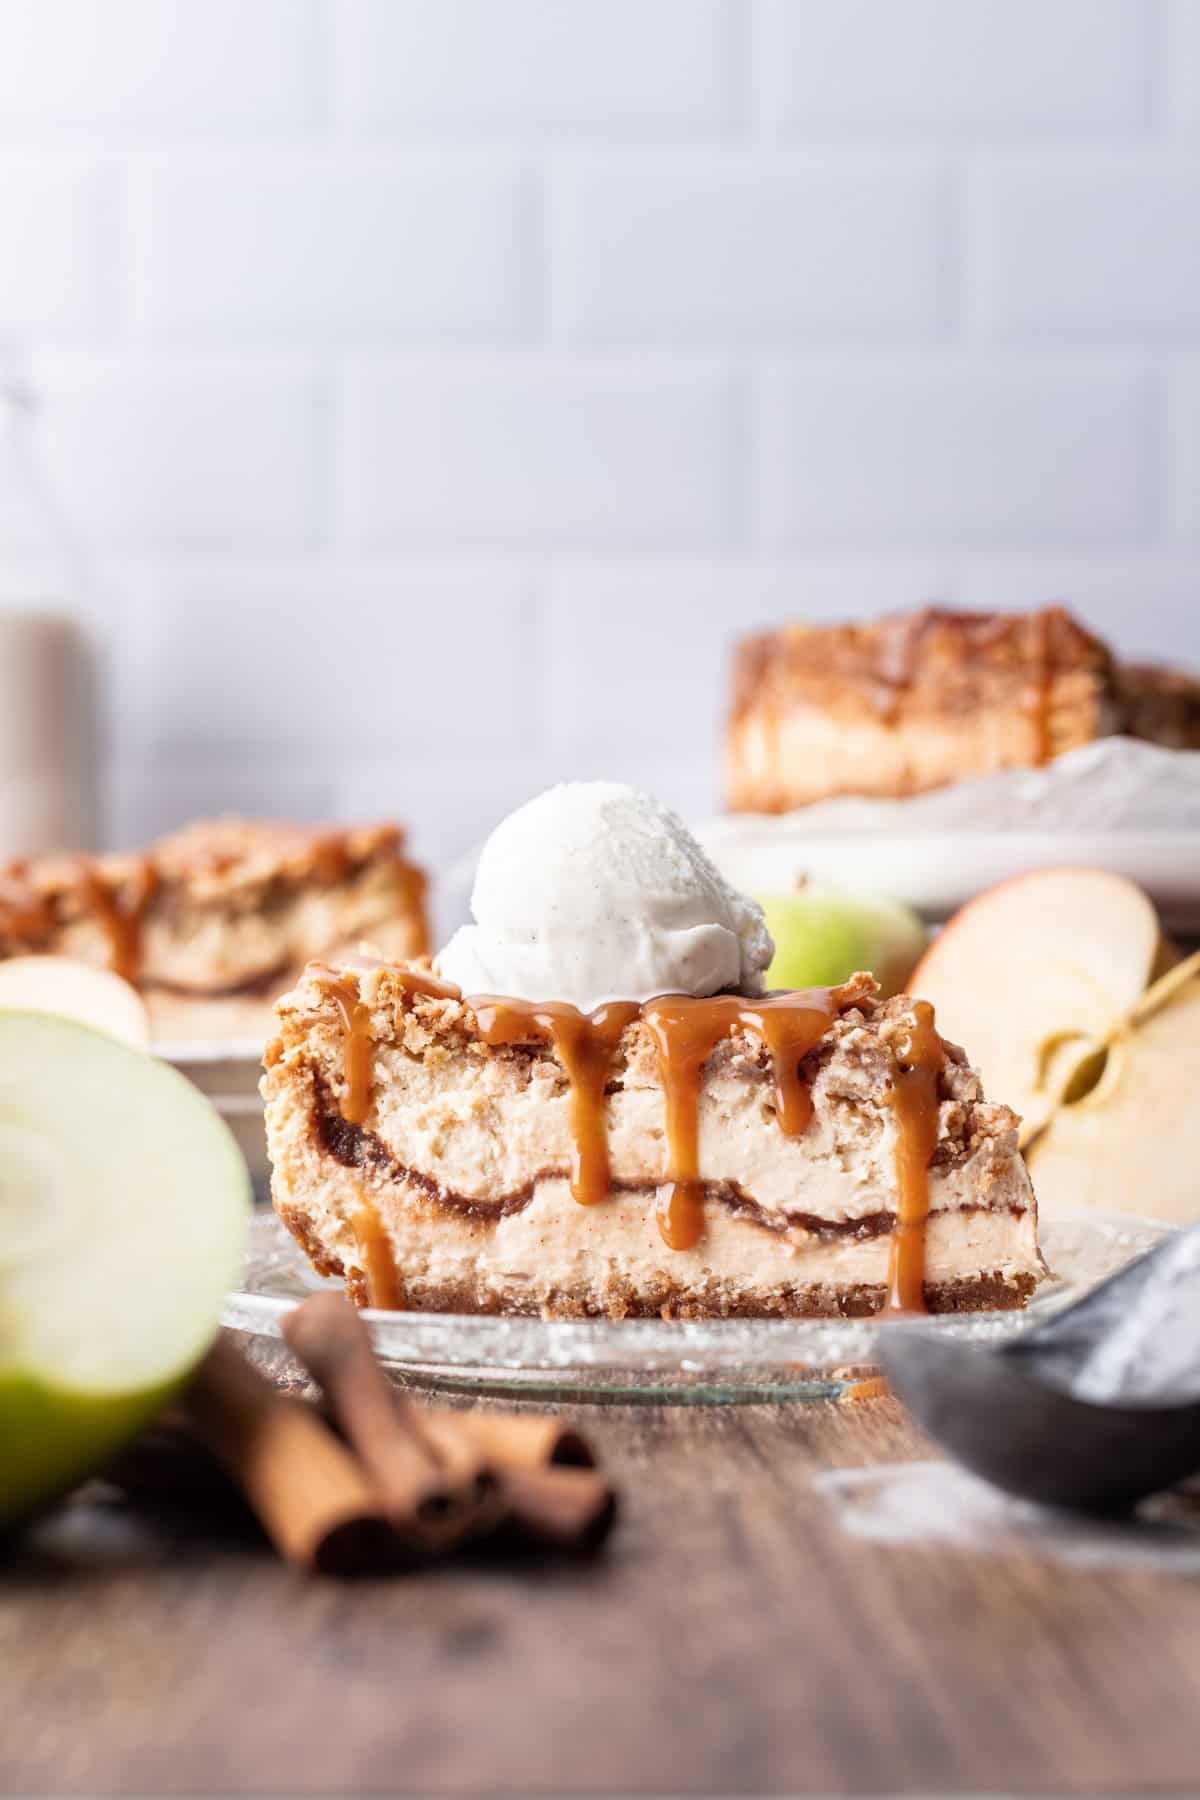 A slice of apple crumble cheesecake on a glass plate with caramel dripping down the side.